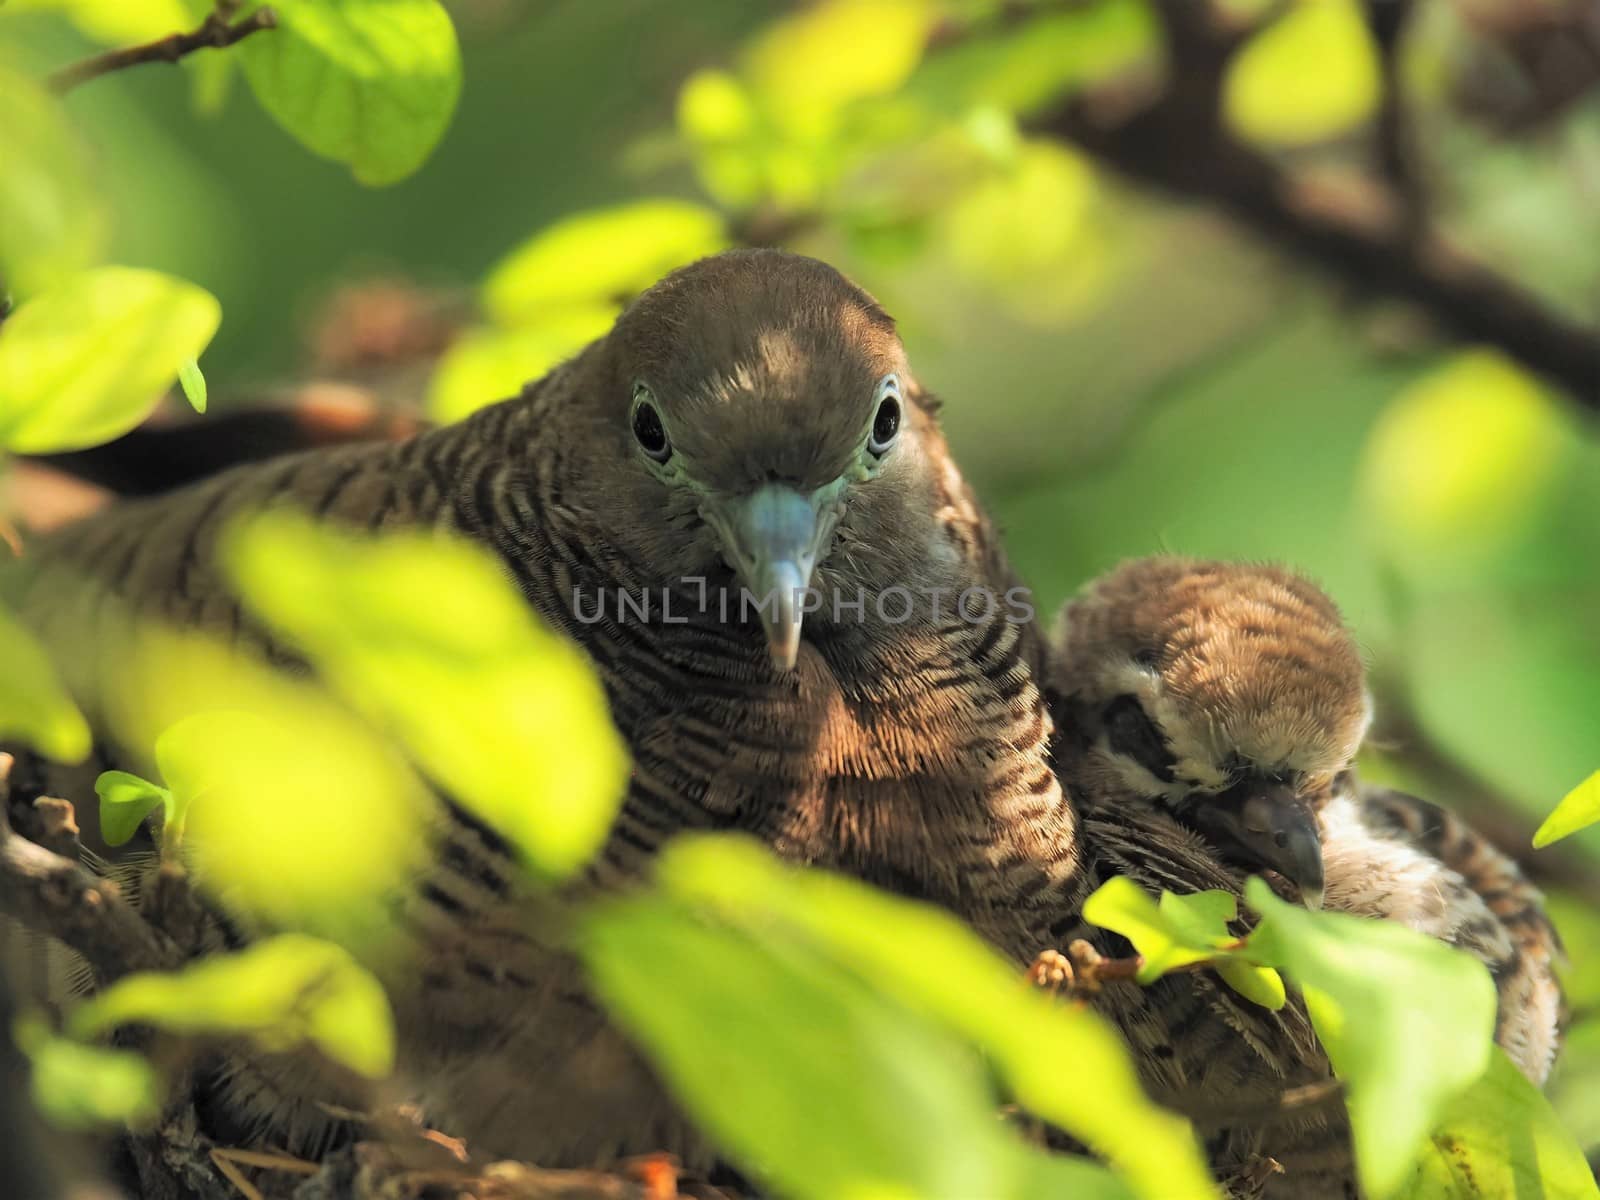 Close Up Of Two Birds, Baby Bird With Mother Portrait In Bird's Nest